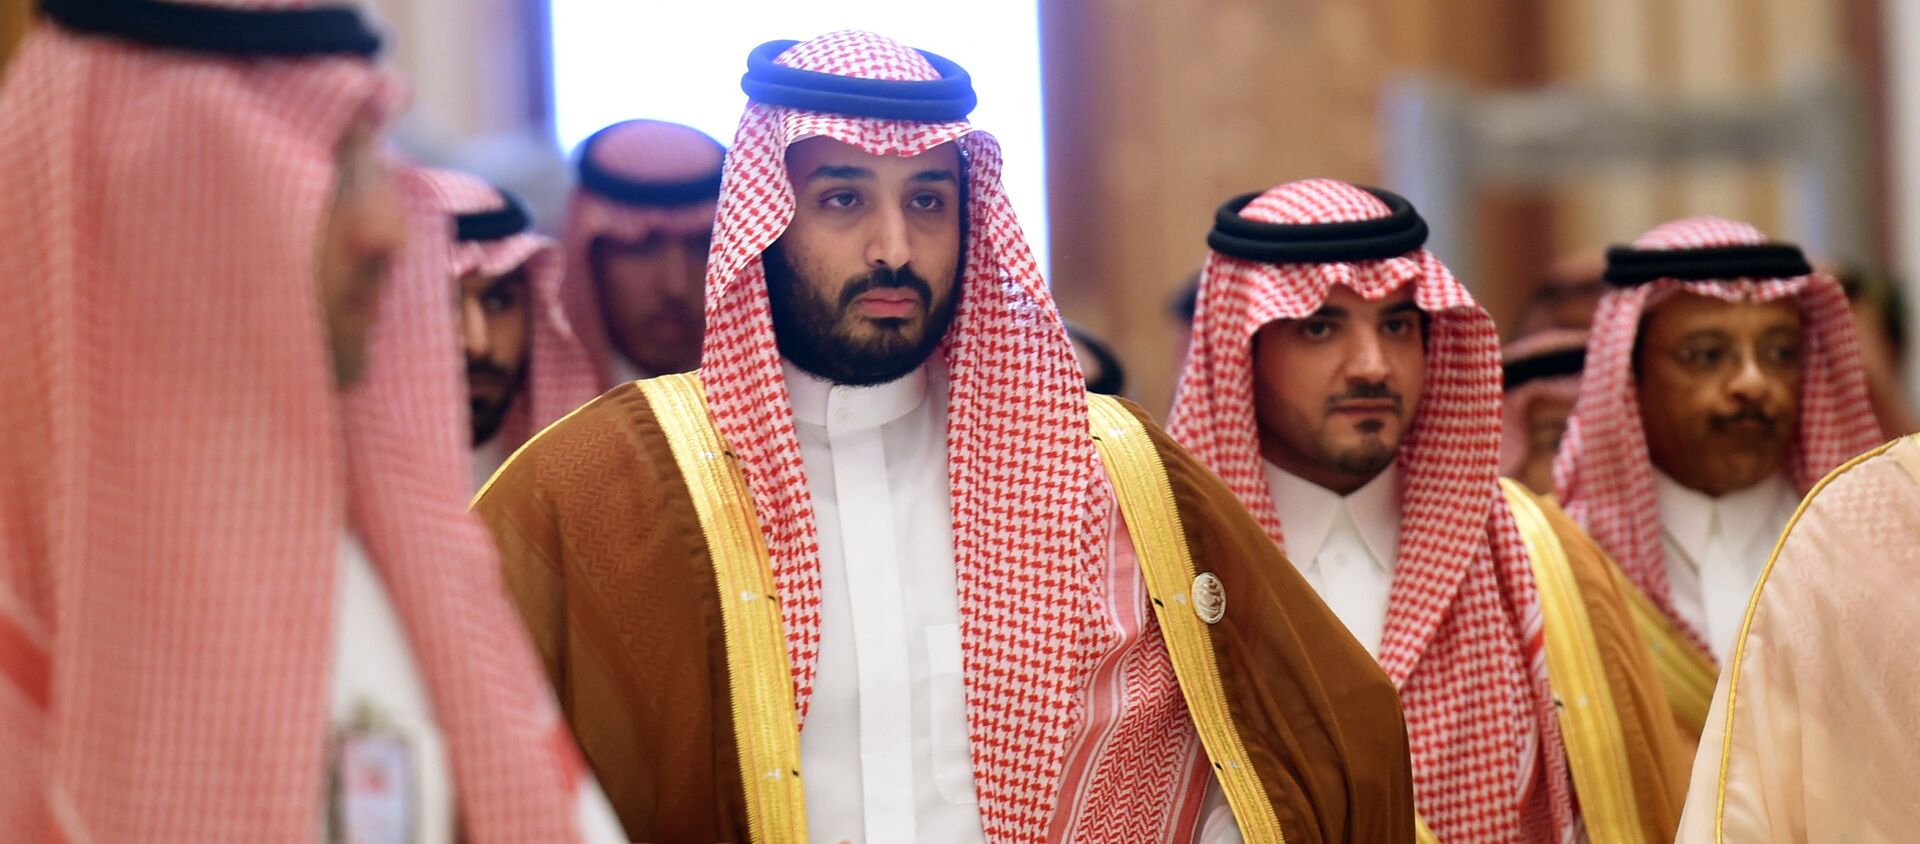 Saudi Defence Minister Mohammed bin Salman (2nd L), who is the desert kingdom's deputy crown prince and second-in-line to the throne, arrives at the closing session of the 4th Summit of Arab States and South American countries held in the Saudi capital Riyadh, on November 11, 2015 - Sputnik Việt Nam, 1920, 21.03.2021